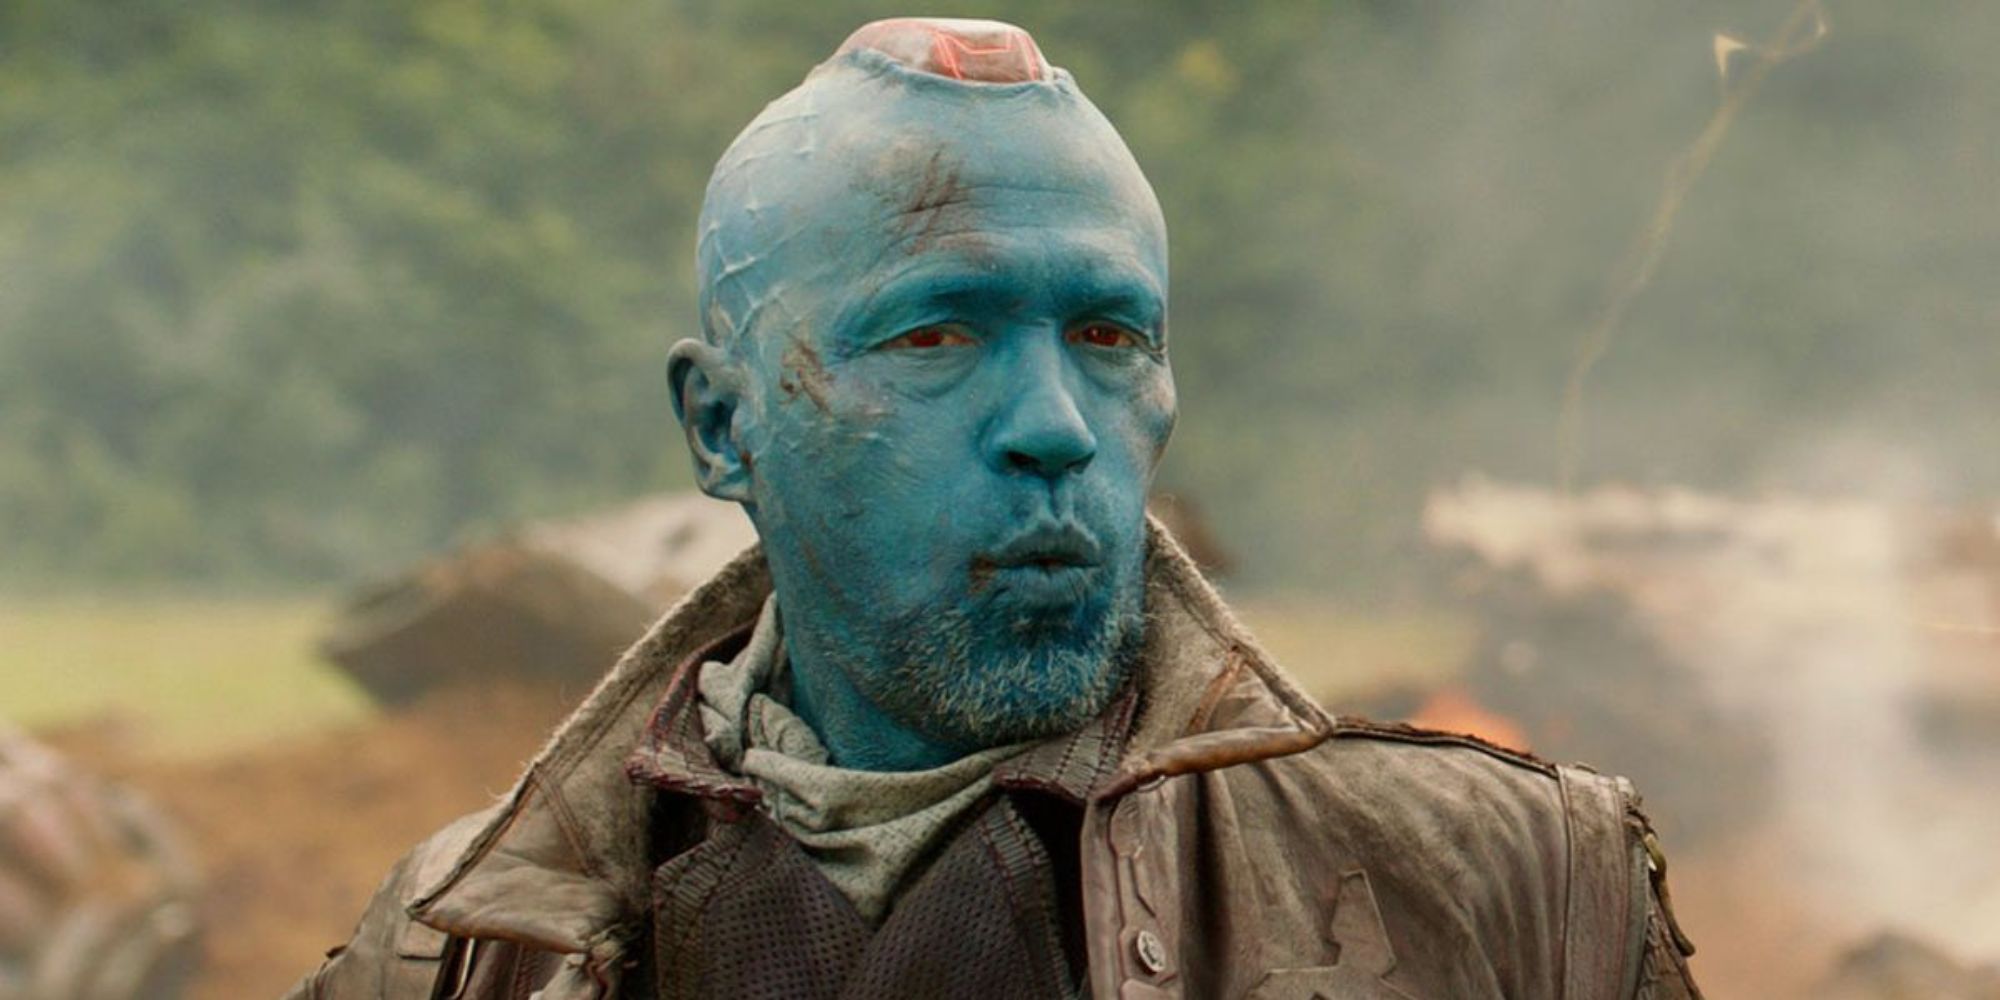 Michael-Rooker-whistles-as-Yondu-in-Guardians of the Galaxy